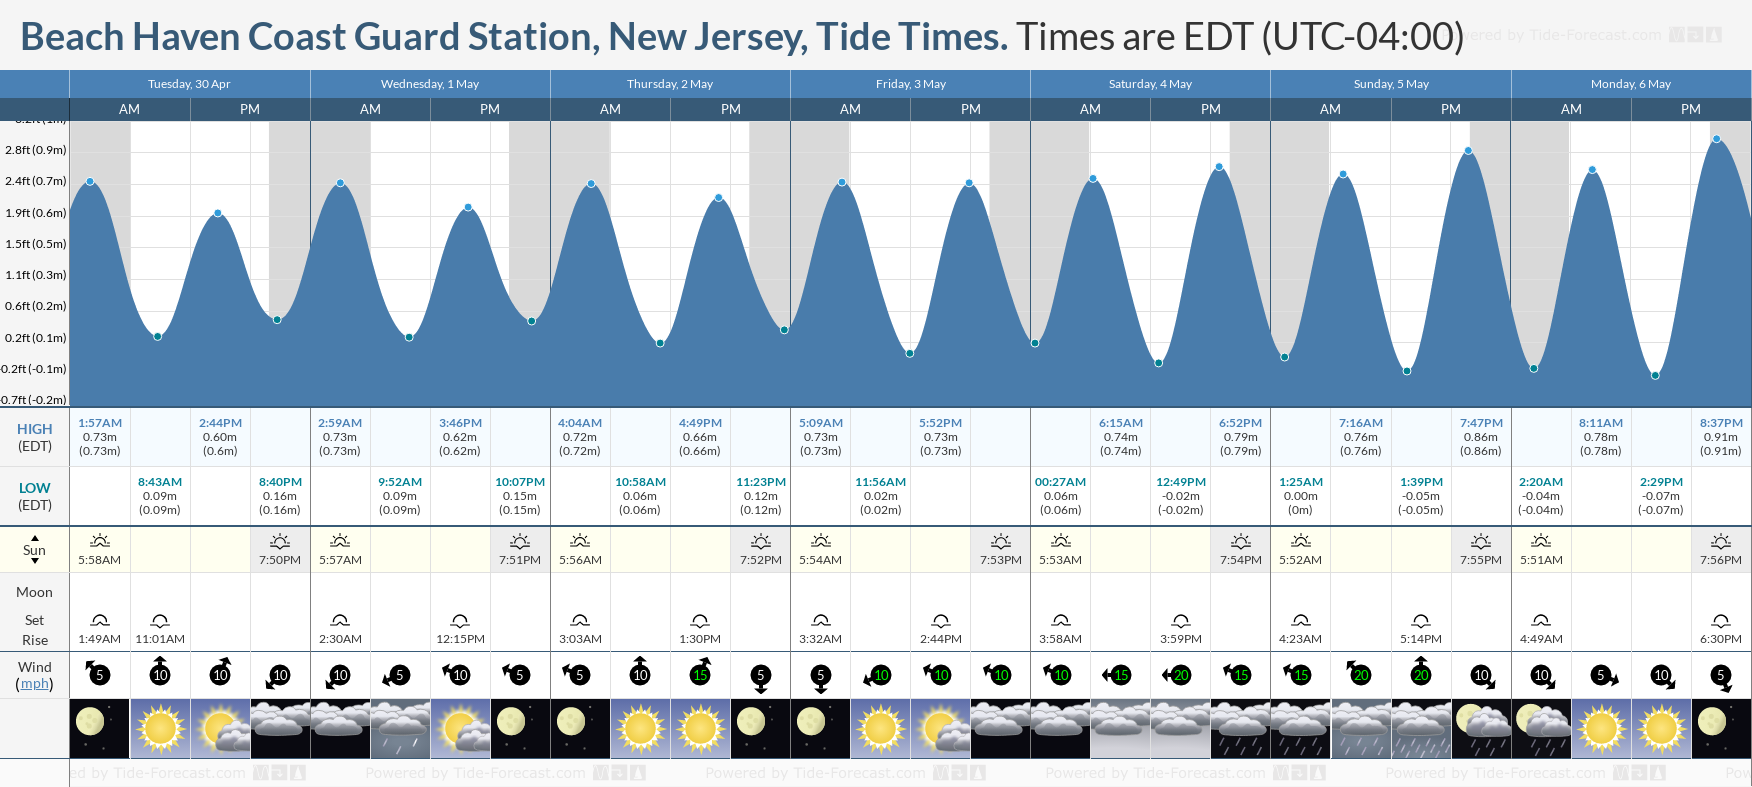 Beach Haven Coast Guard Station, New Jersey Tide Chart including high and low tide tide times for the next 7 days